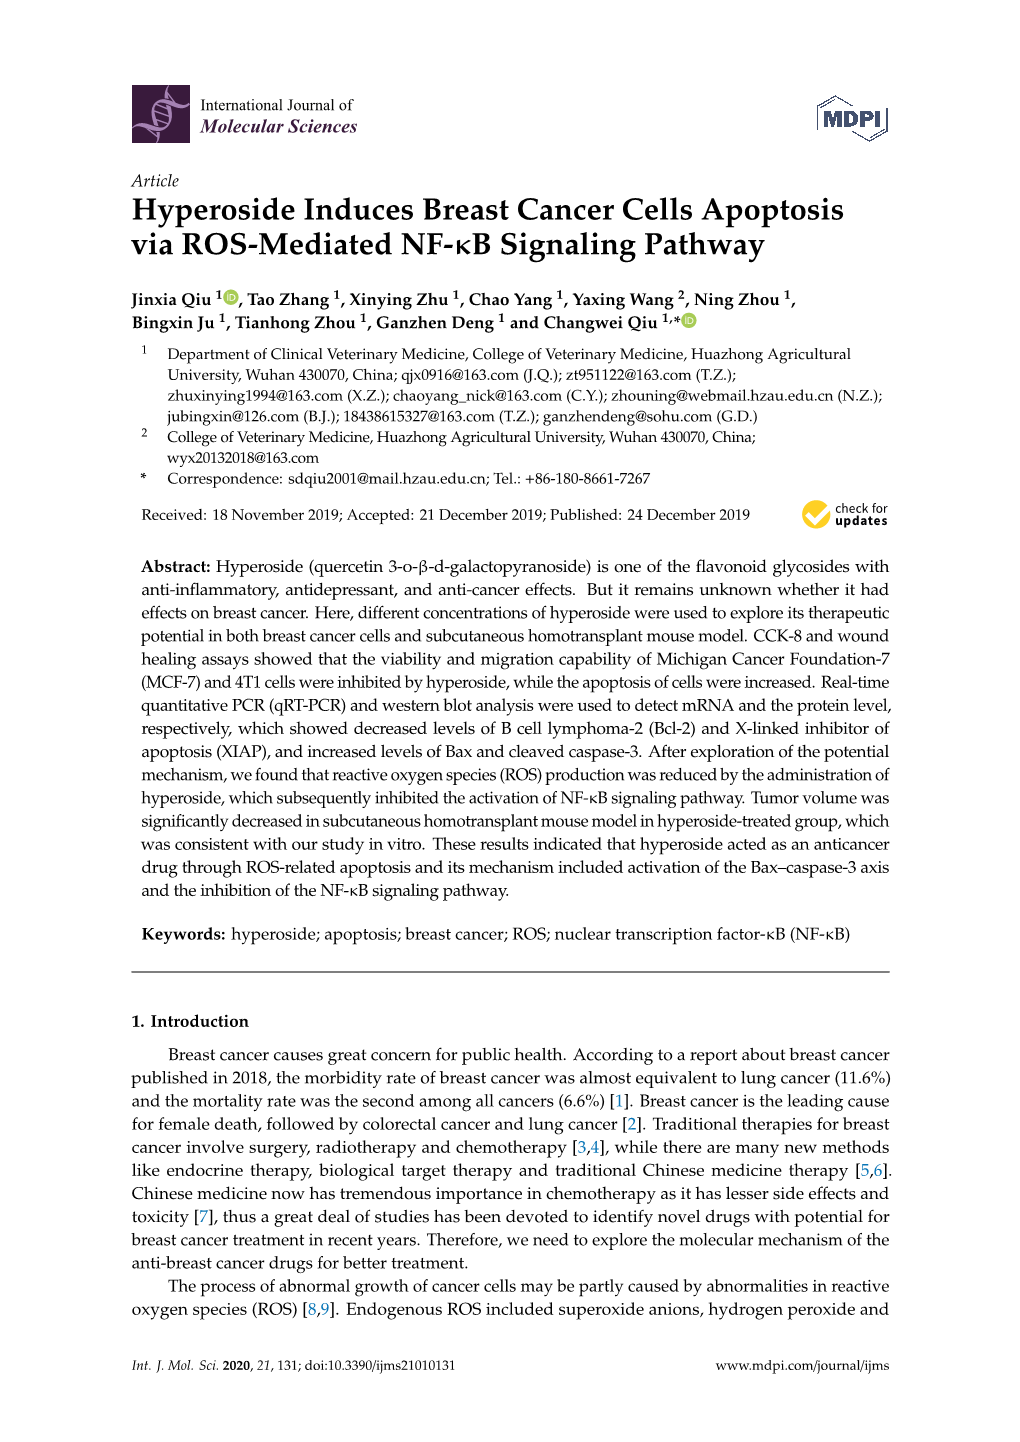 Hyperoside Induces Breast Cancer Cells Apoptosis Via ROS-Mediated NF-Κb Signaling Pathway